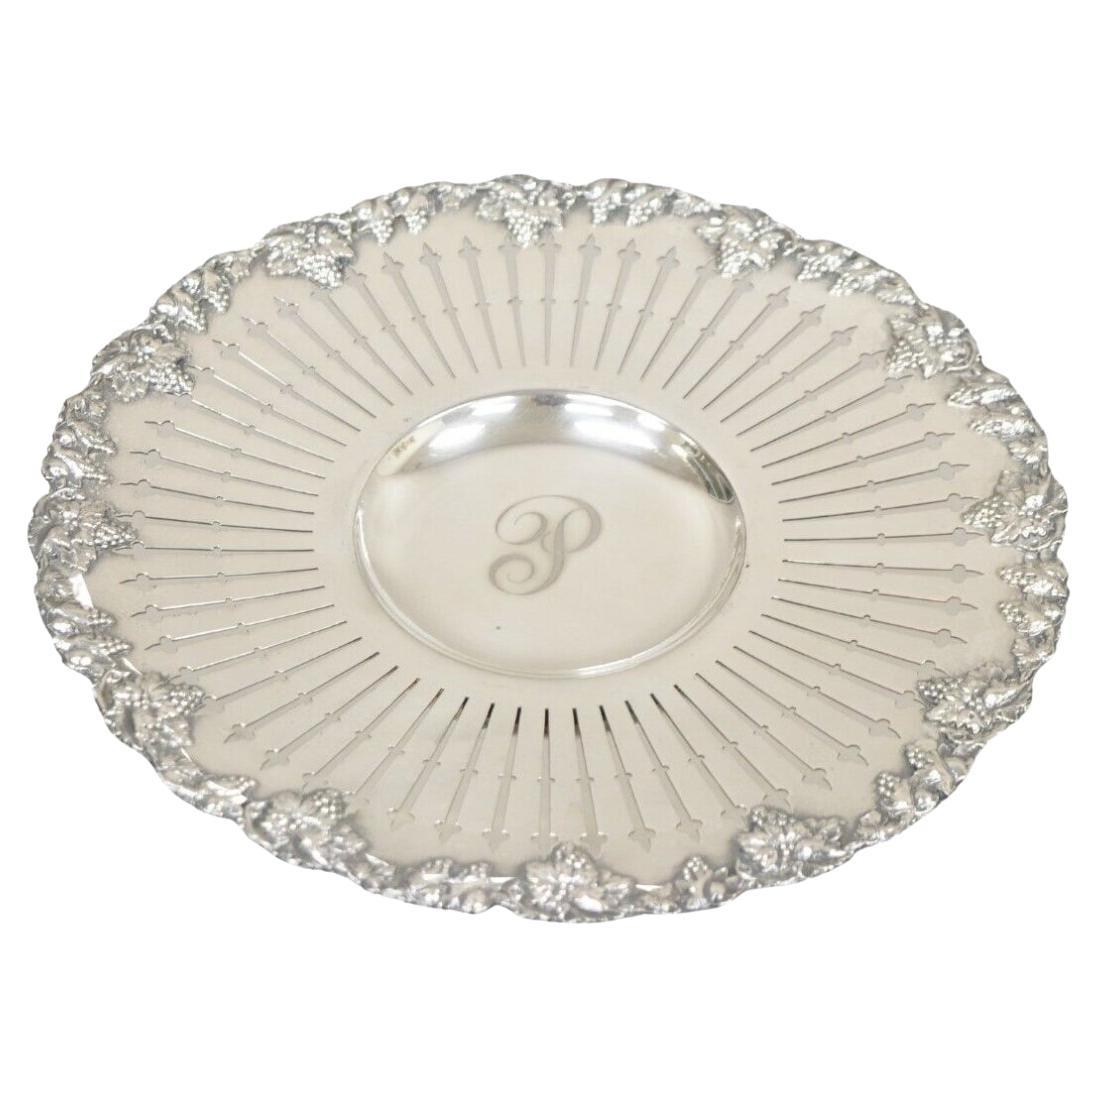 English Edwardian Grapevine Repousse Silver Plated Pierced Serving Platter "P" For Sale